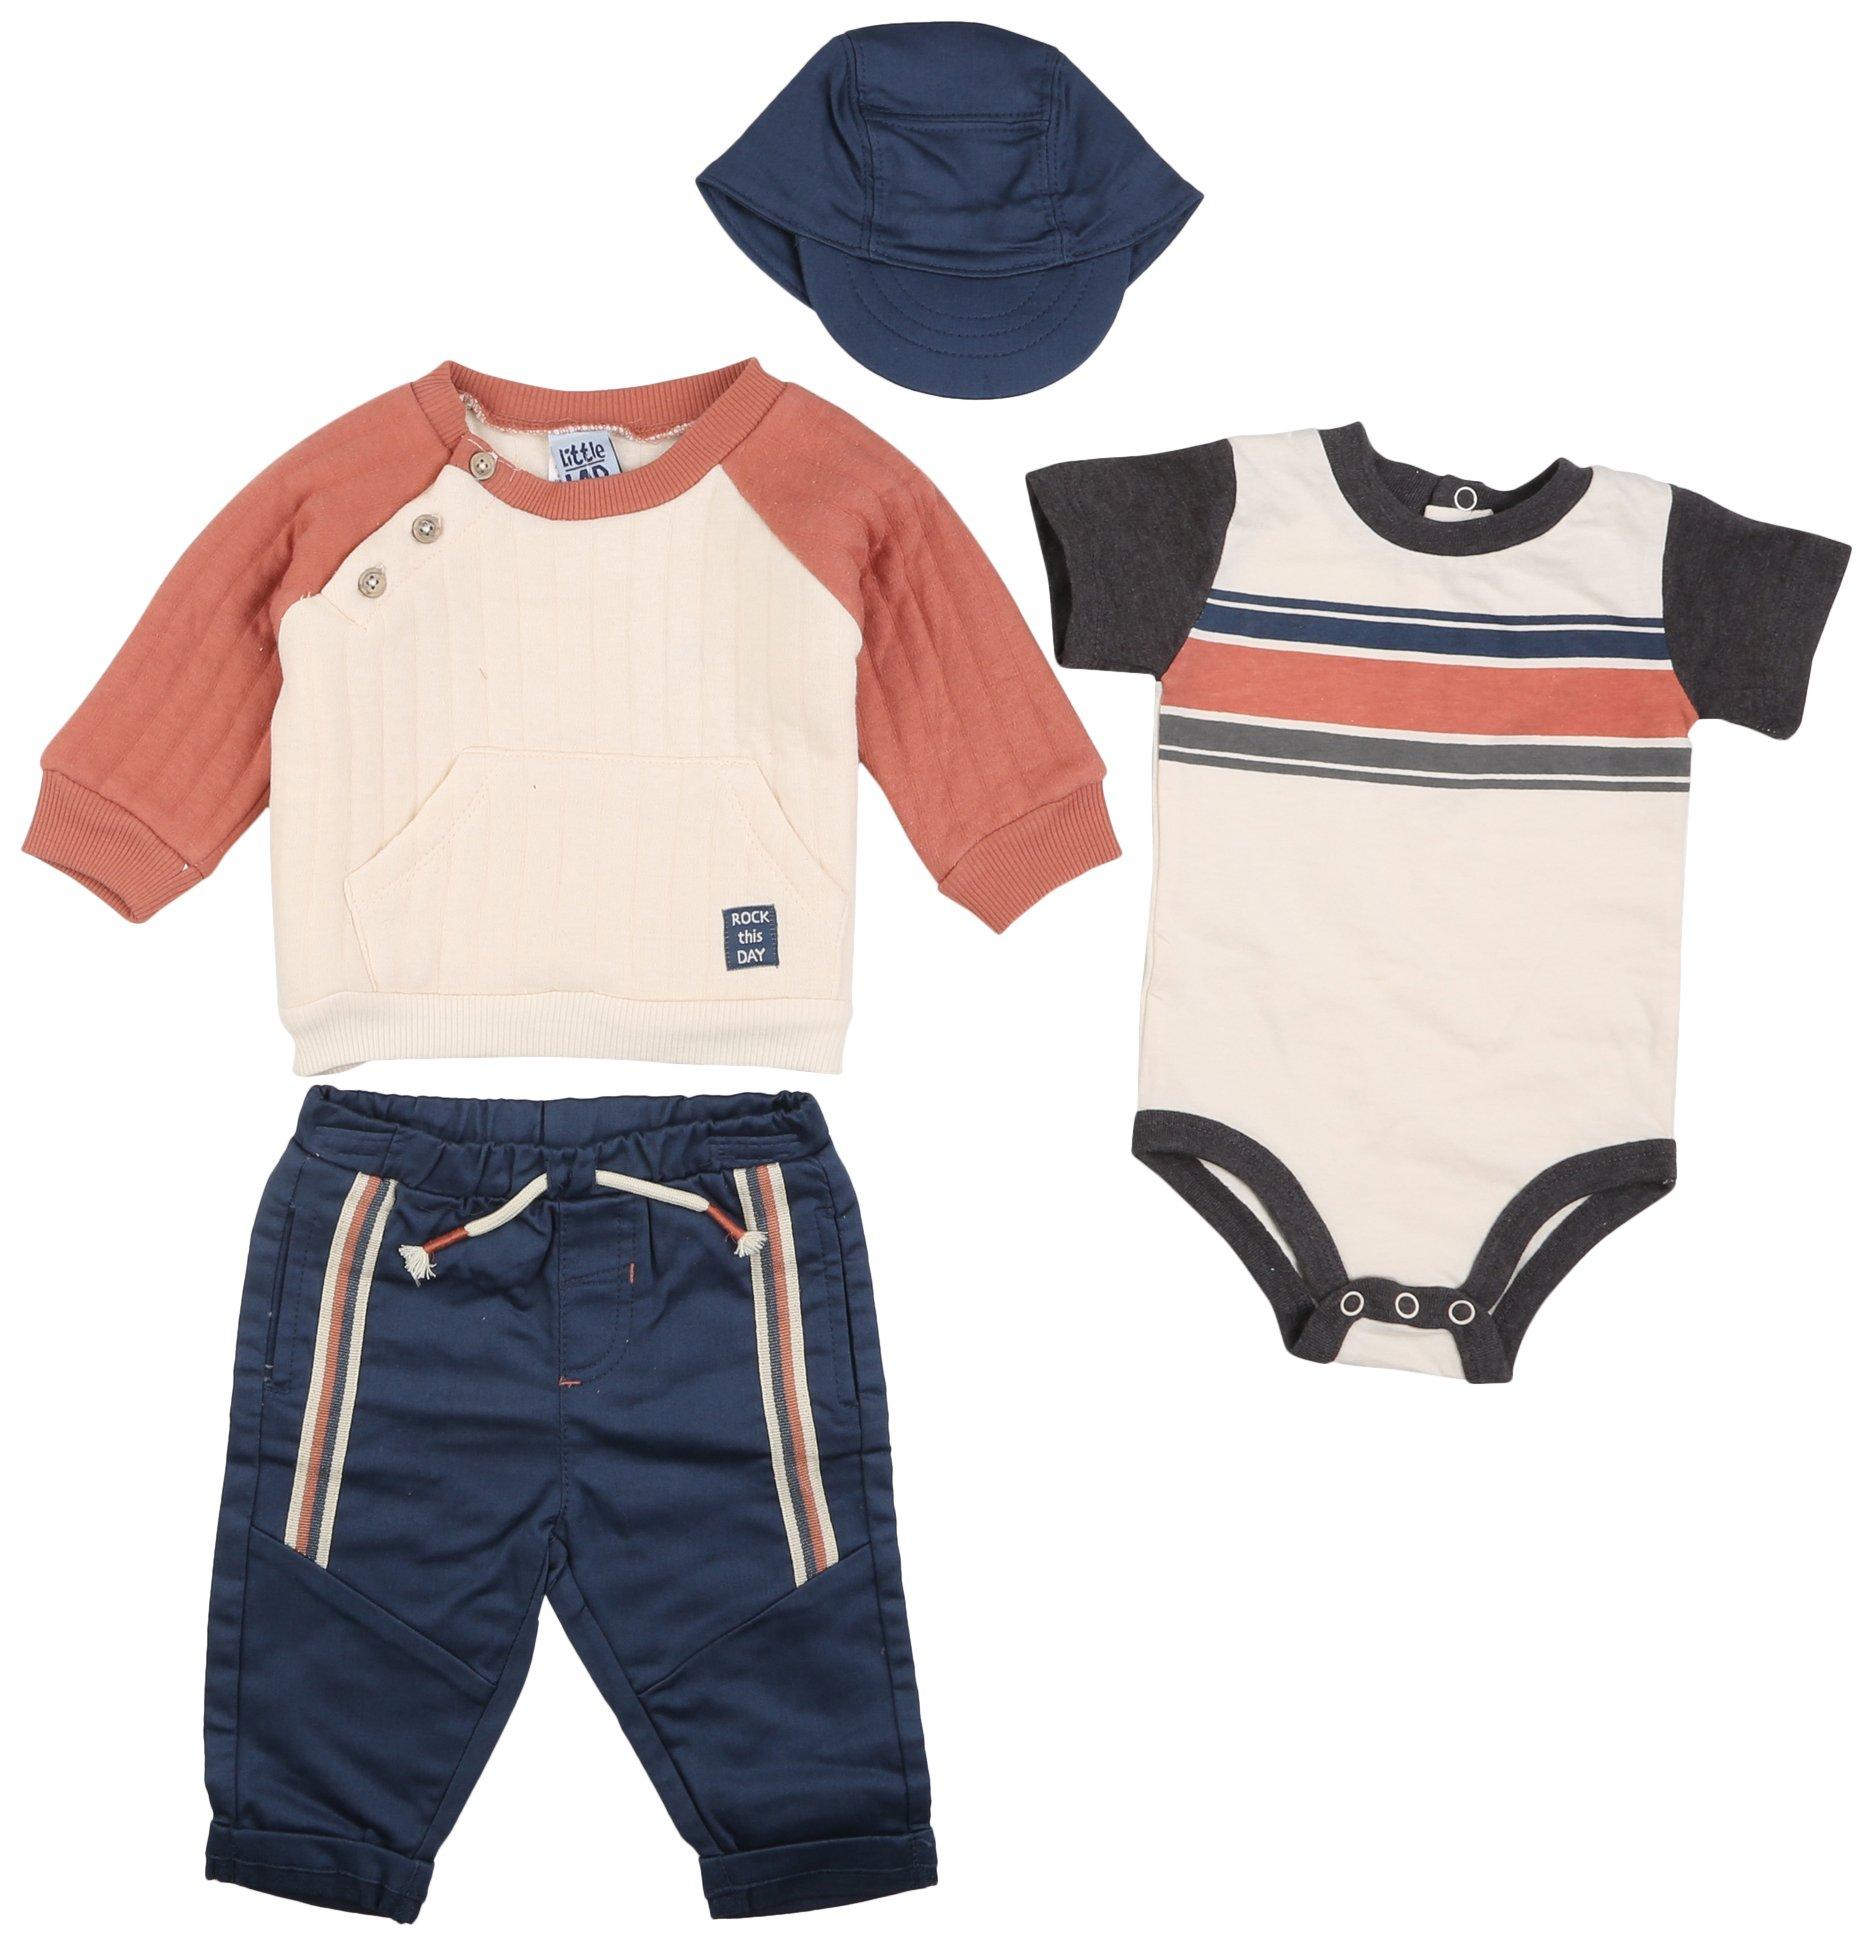 Little Lad Baby Boys 4-Pc. Holiday Pant Set